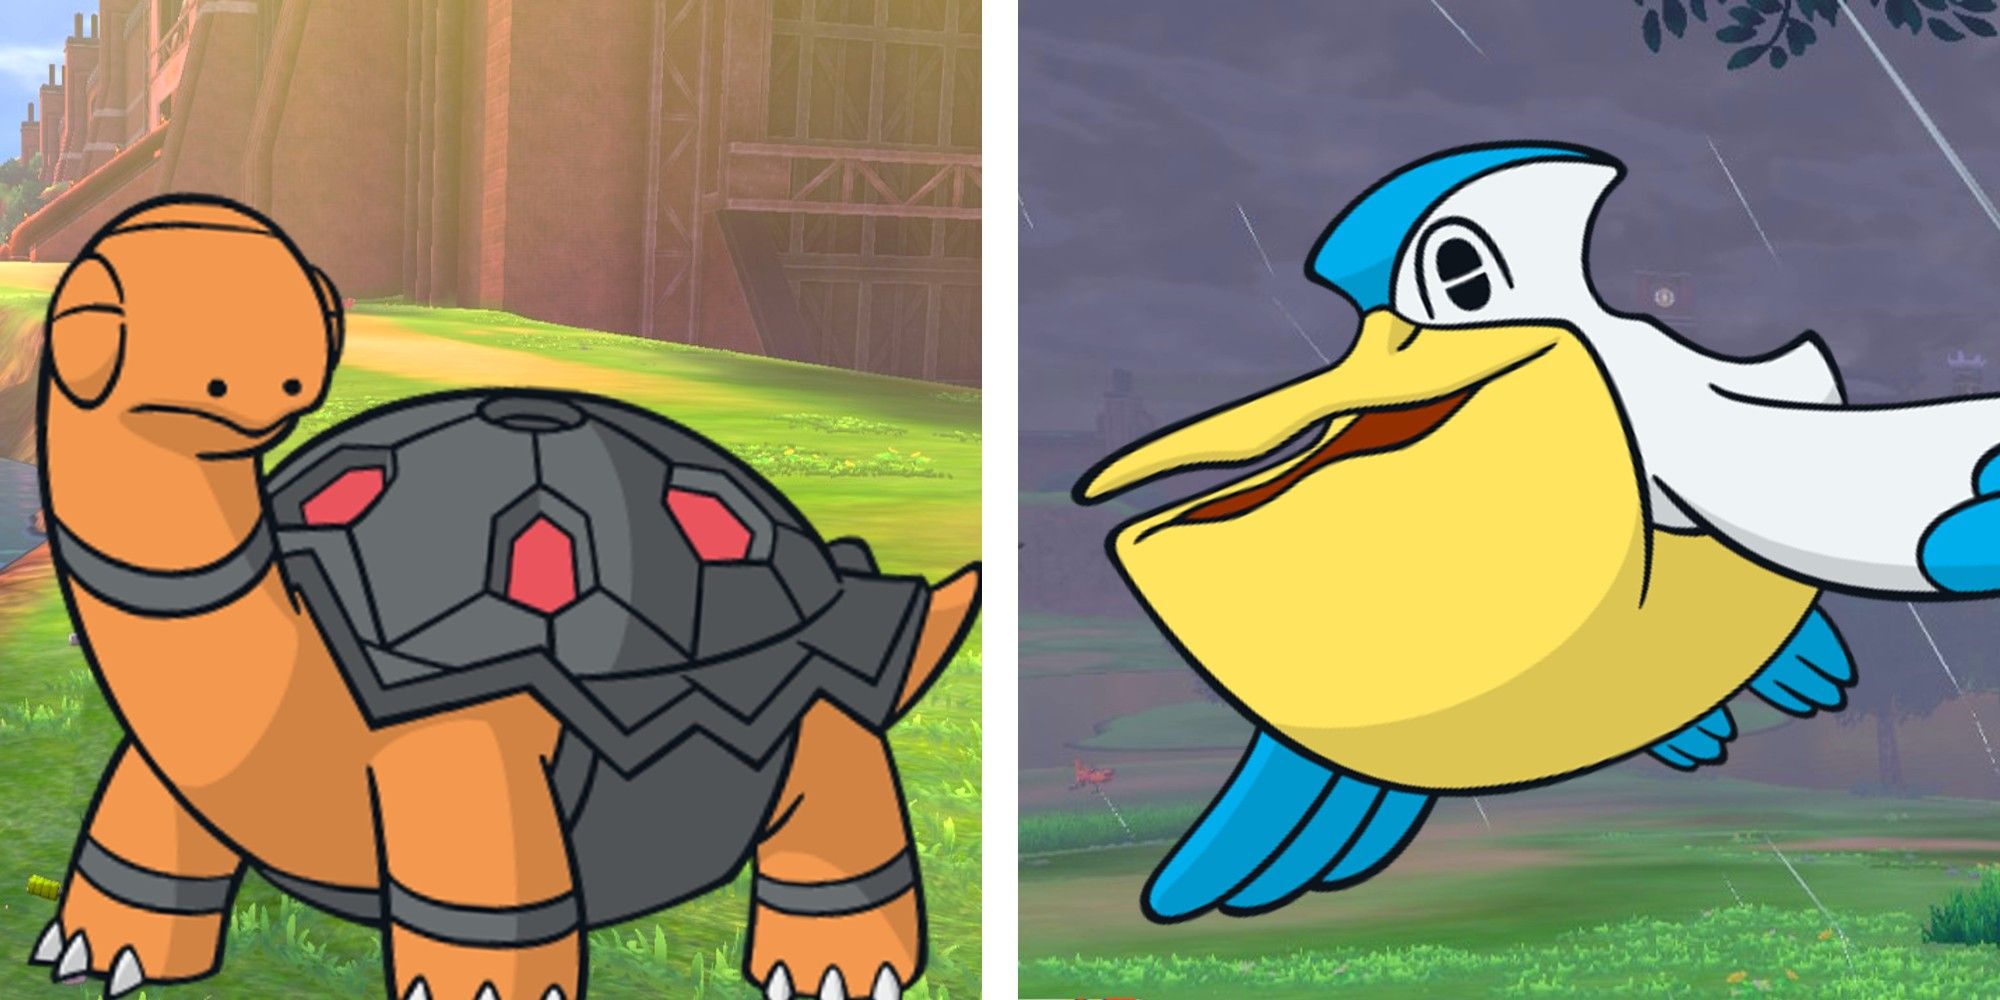 A split image: Torkoal is on the left with a sunny background, Pelipper is on the right in rain.